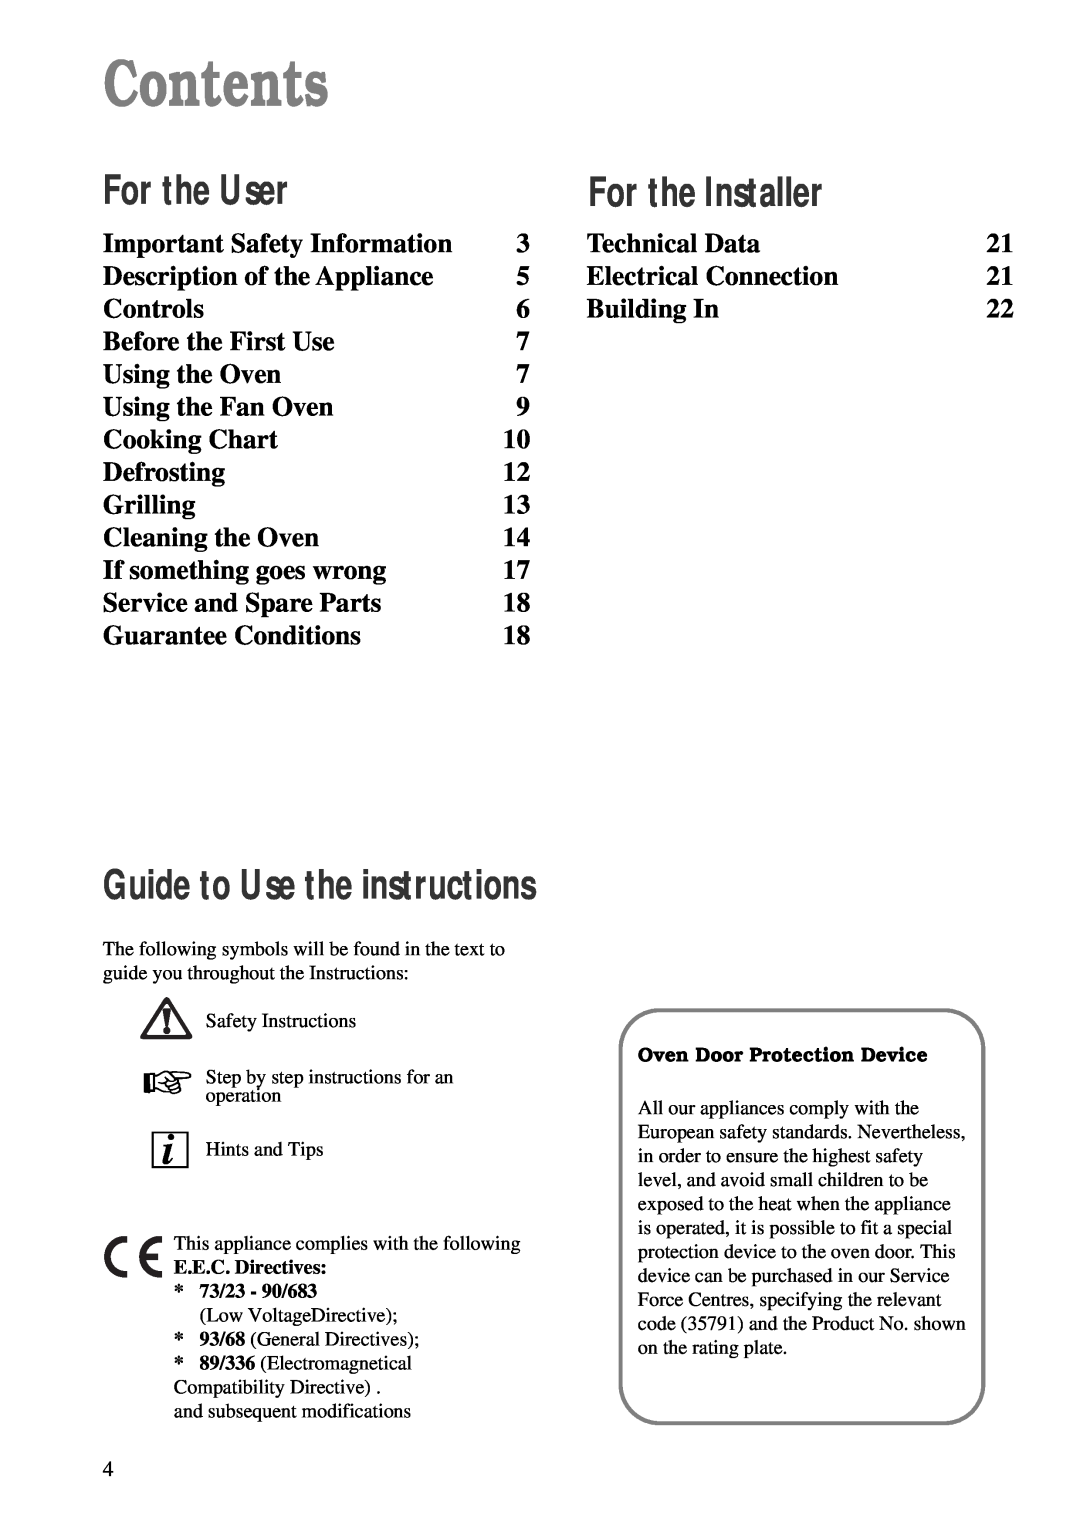 Tricity Bendix TBS 603 manual Contents, For the User, For the Installer, Guide to Use the instructions 